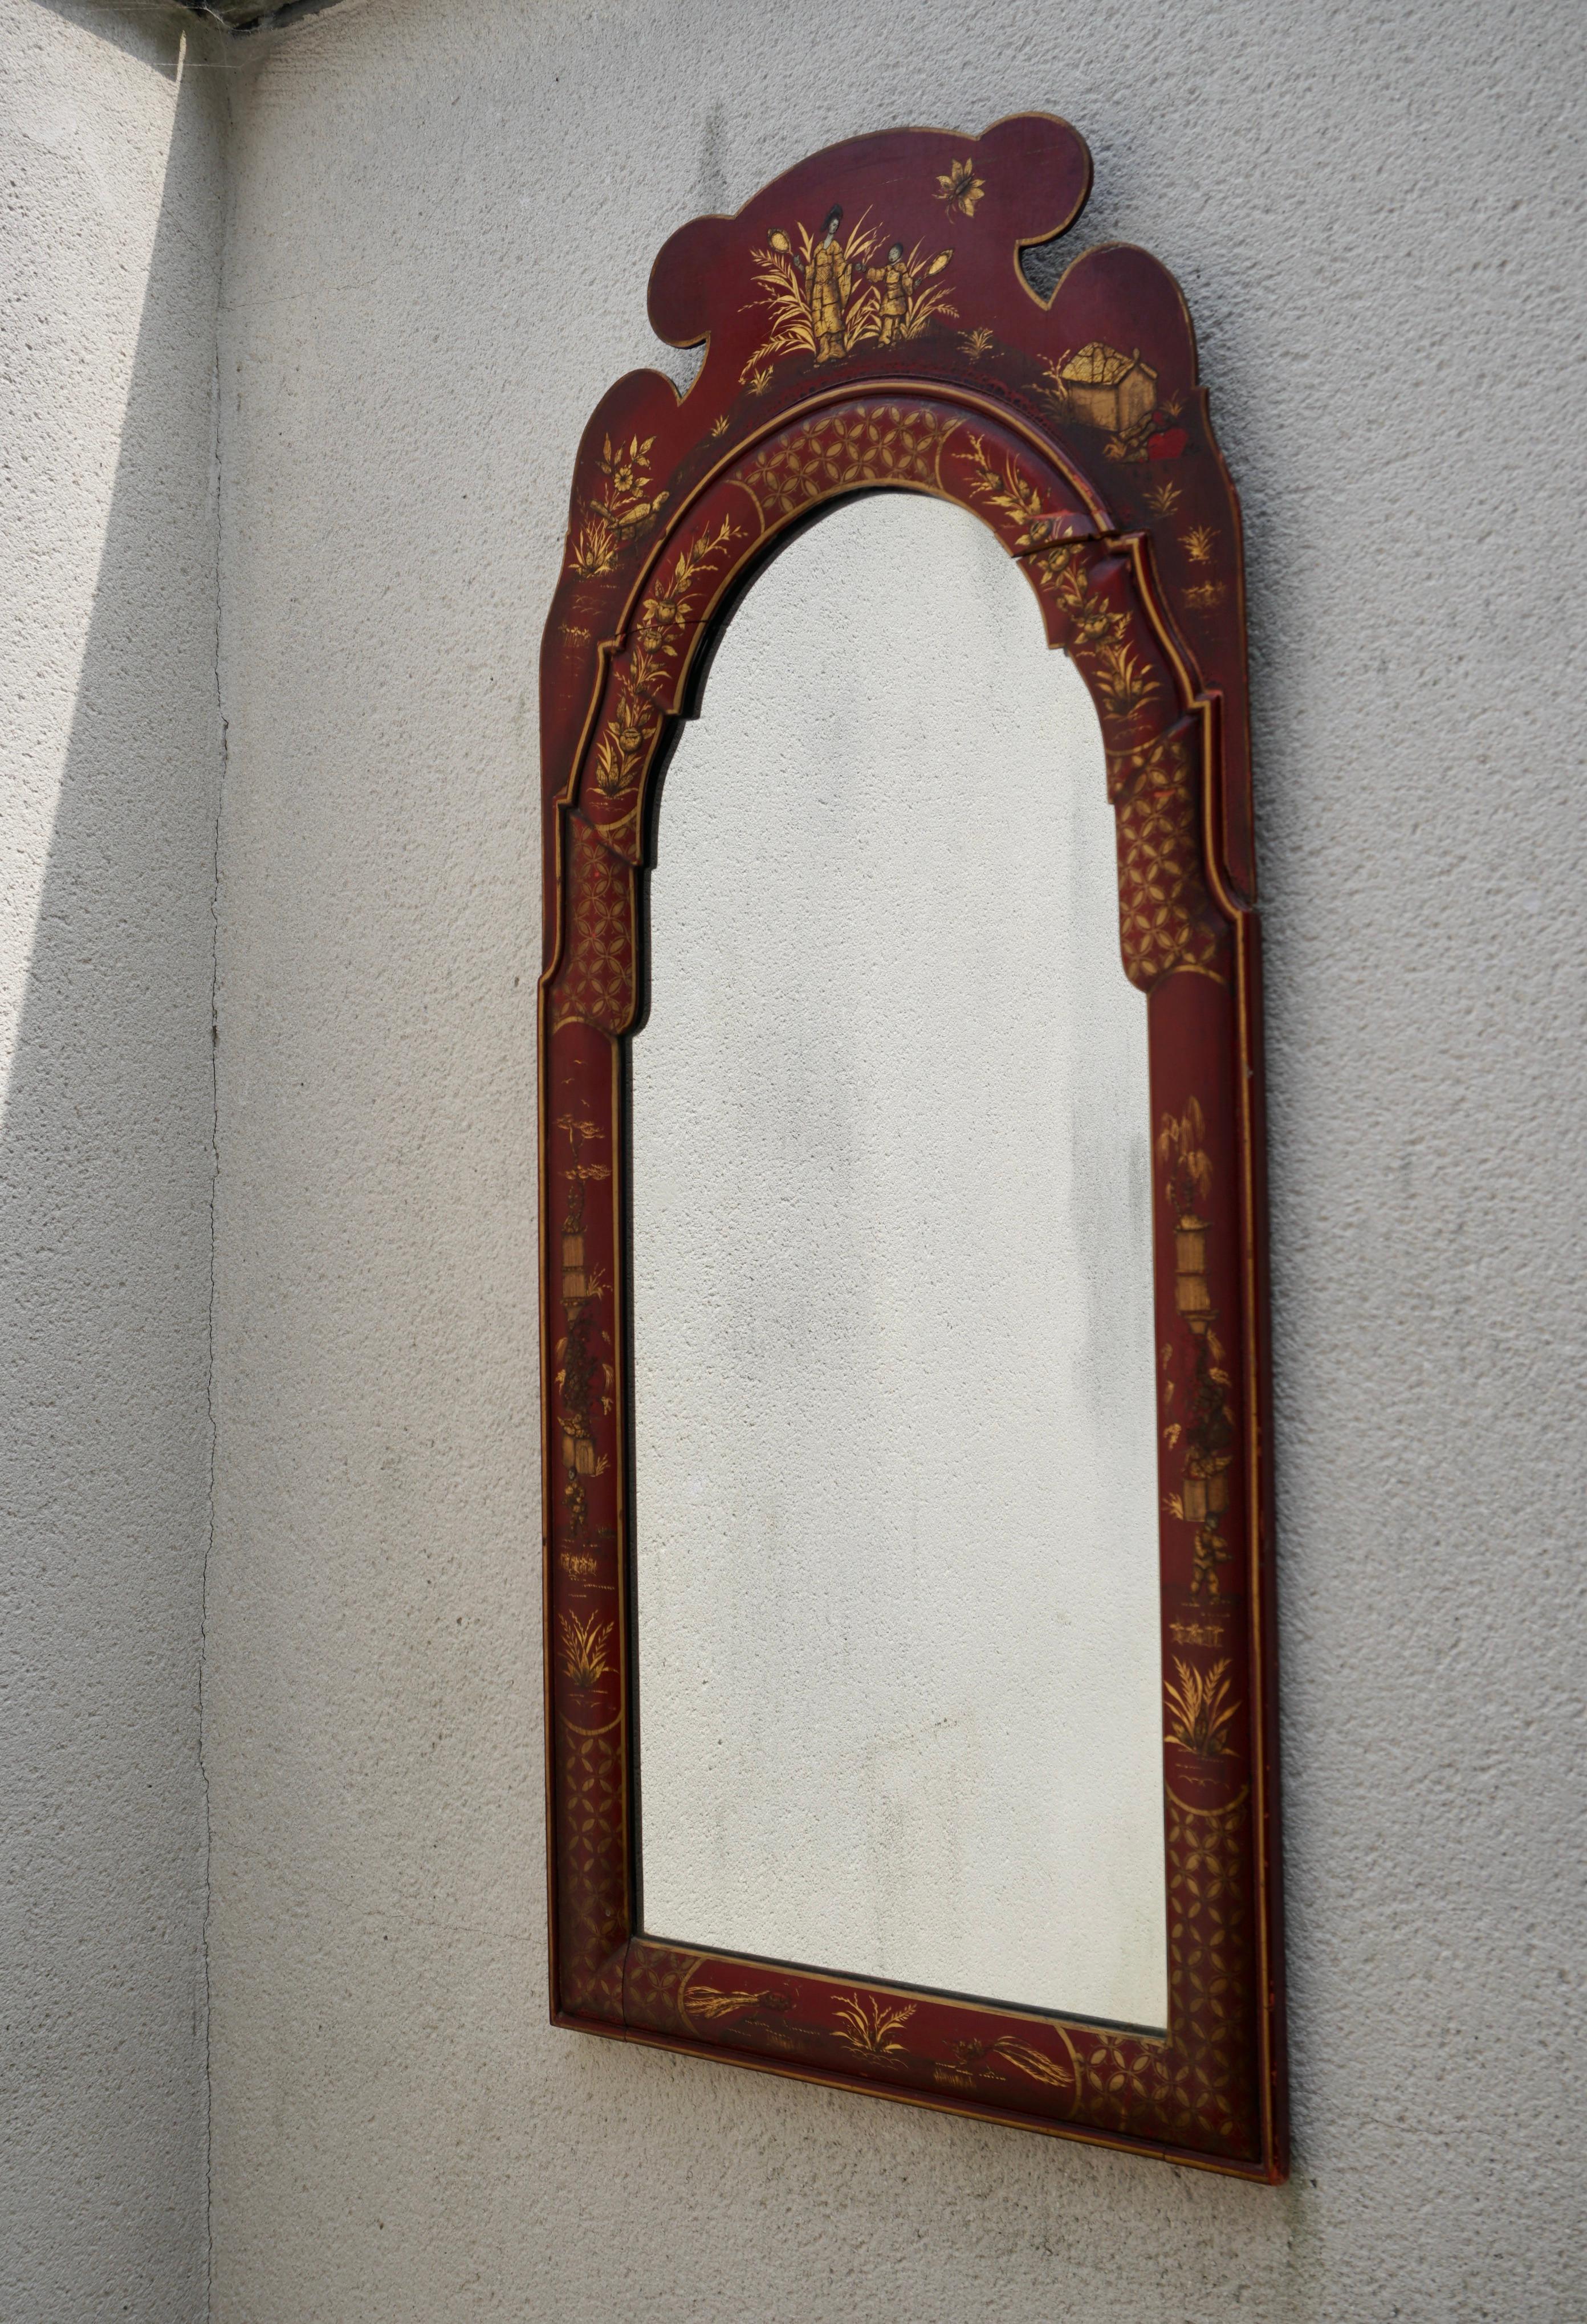 This is a lovely hand painted chinoiserie mirror with Georgian styling. It depicts hand painted pastoral scenes on a Chinese red background. The frame is wood and unmarked. It is believed to be Italian.